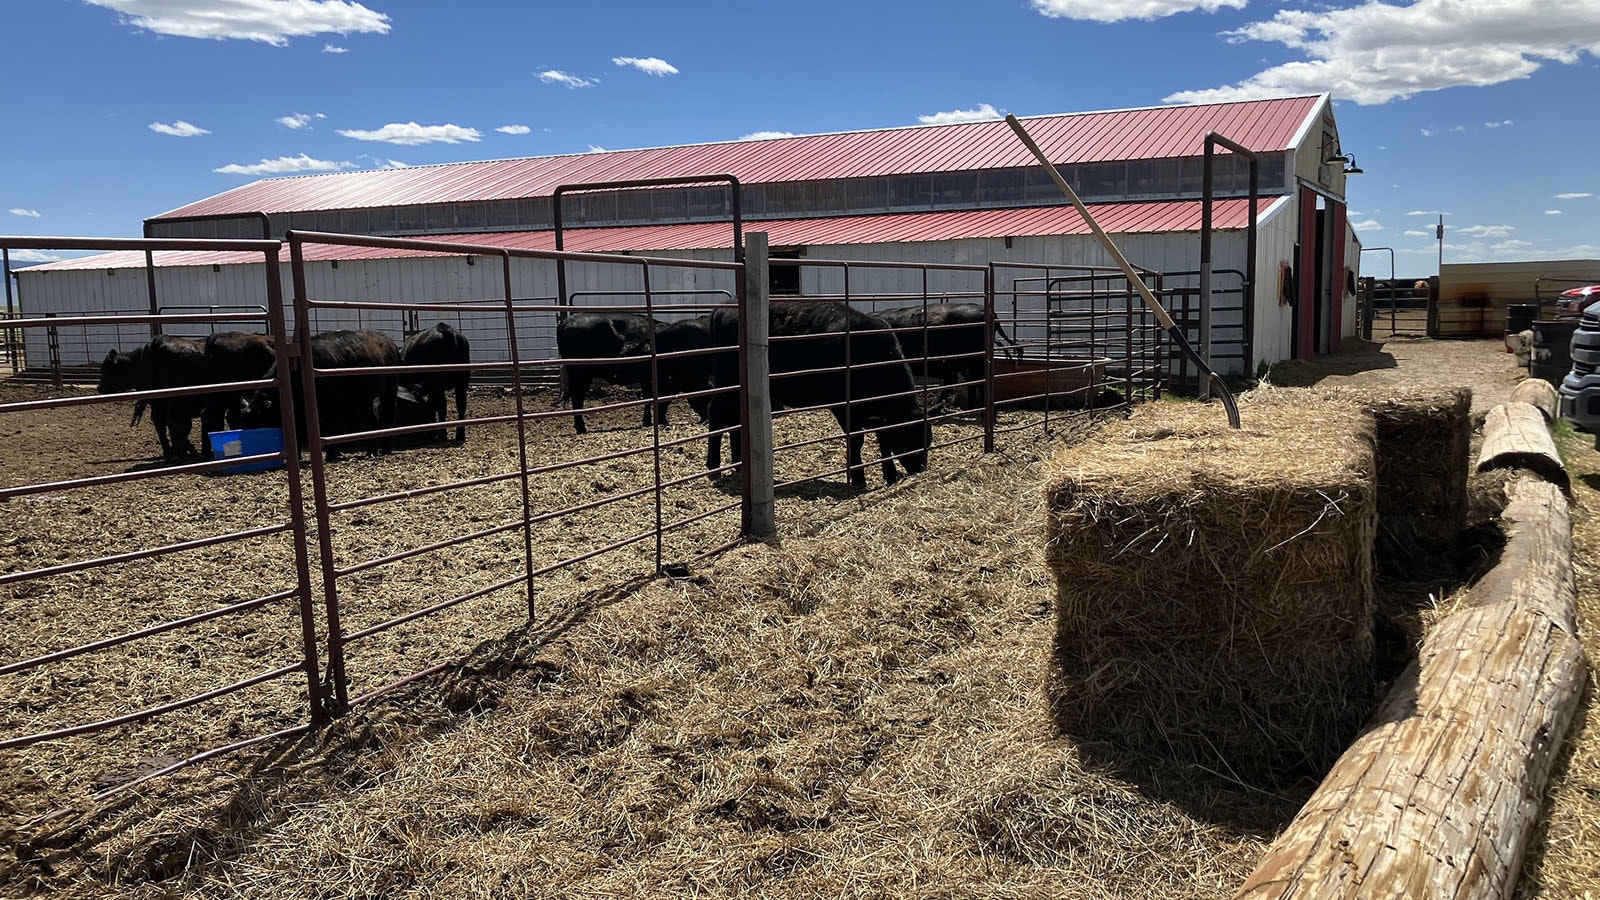 Cattle at the C Bracket Horse Barn are available for training wannabe cowboys and cowgirls on roping, sorting, and herding.